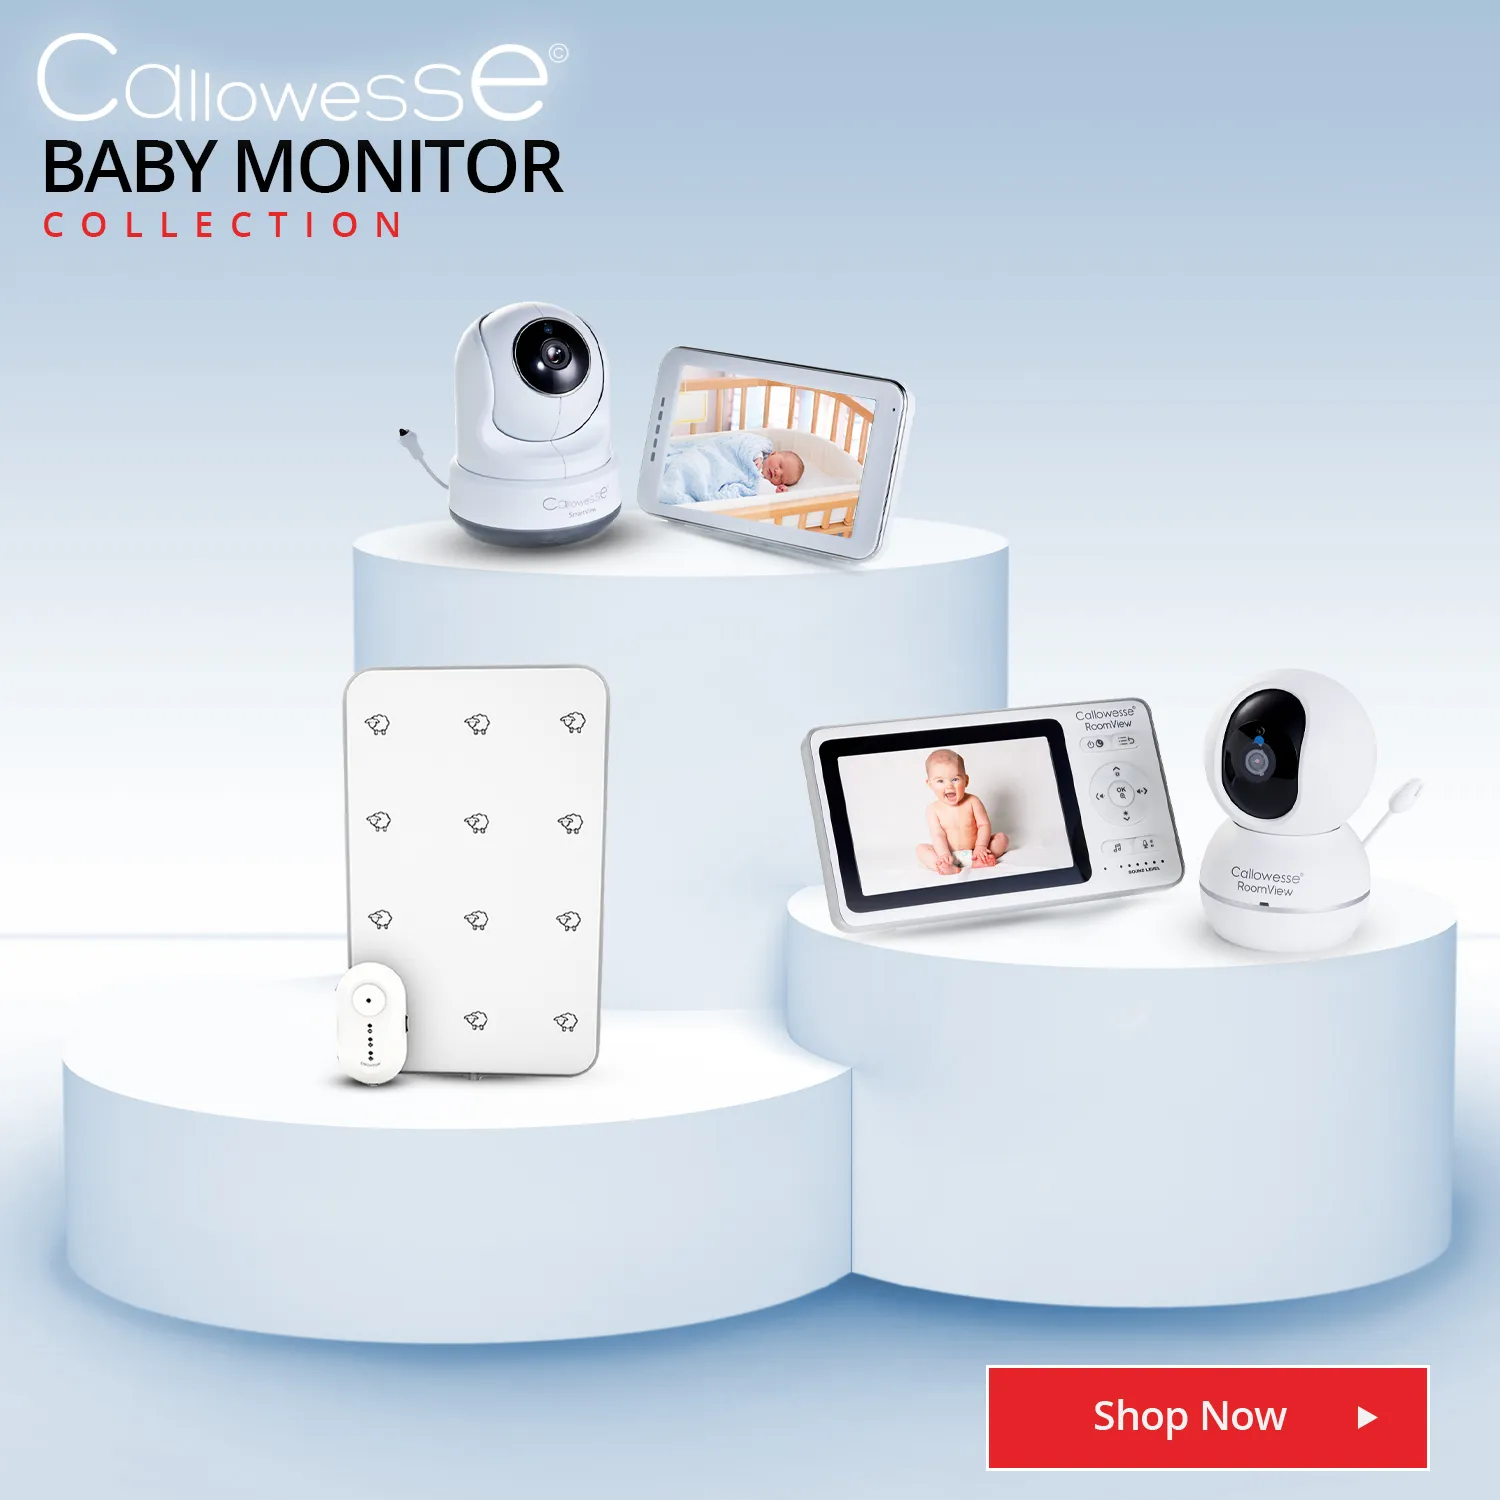 Callowesse Baby Monitor